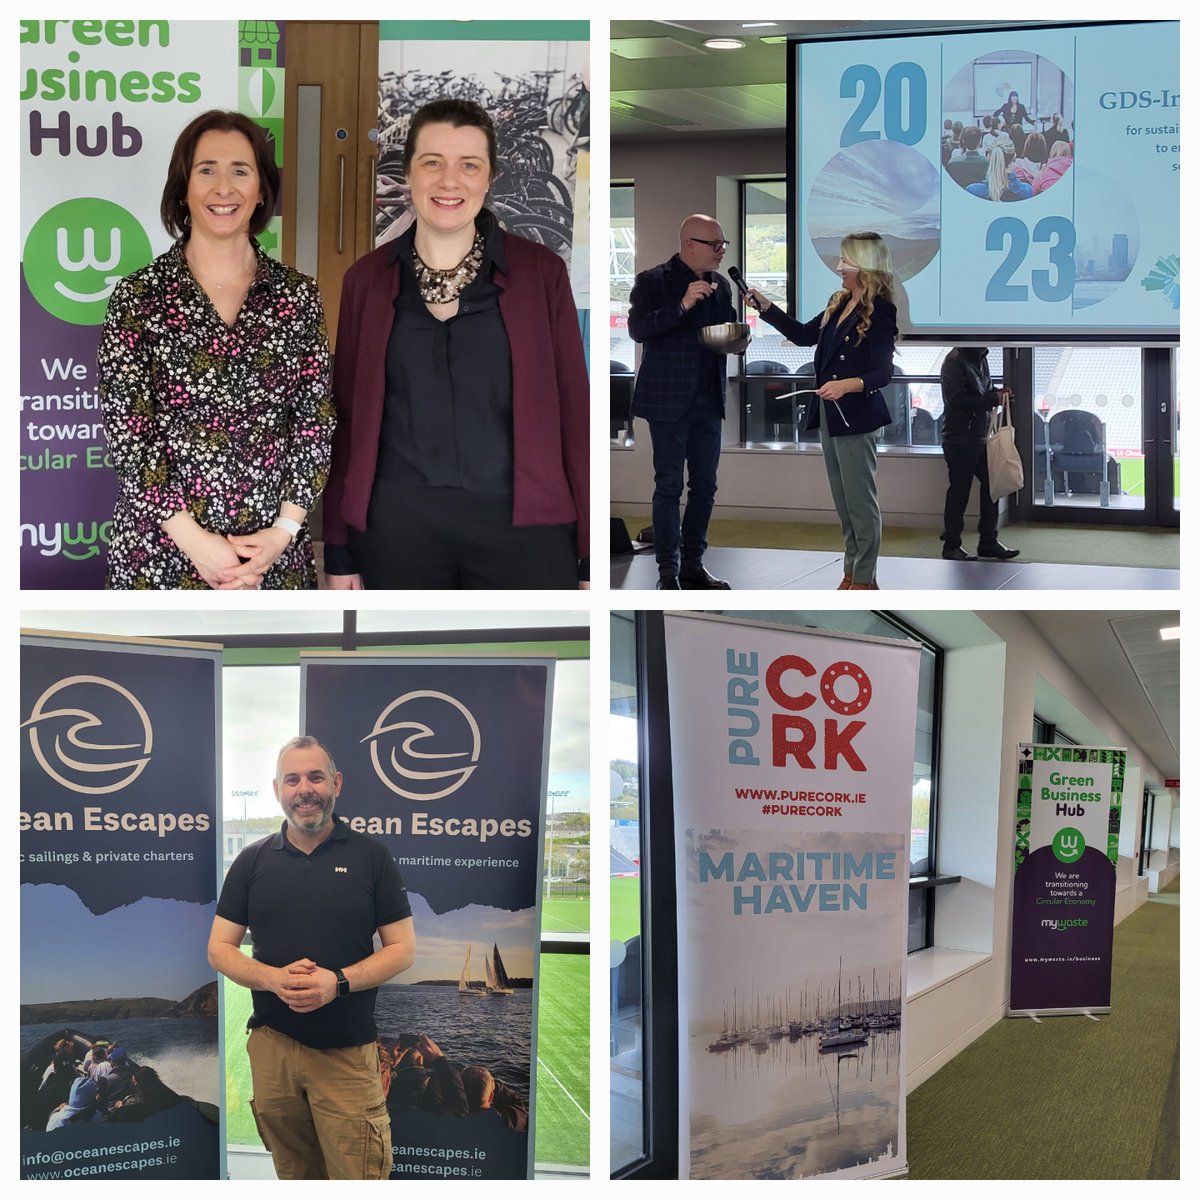 Great to meet so many businesses at #KeepCorkMeeting who had stories to share about their #sustainability work. Tourism businesses are tackling food waste, converting to greener fuels, installing solarPV panels, walking/cycling to work... and much more... keep up the great work!